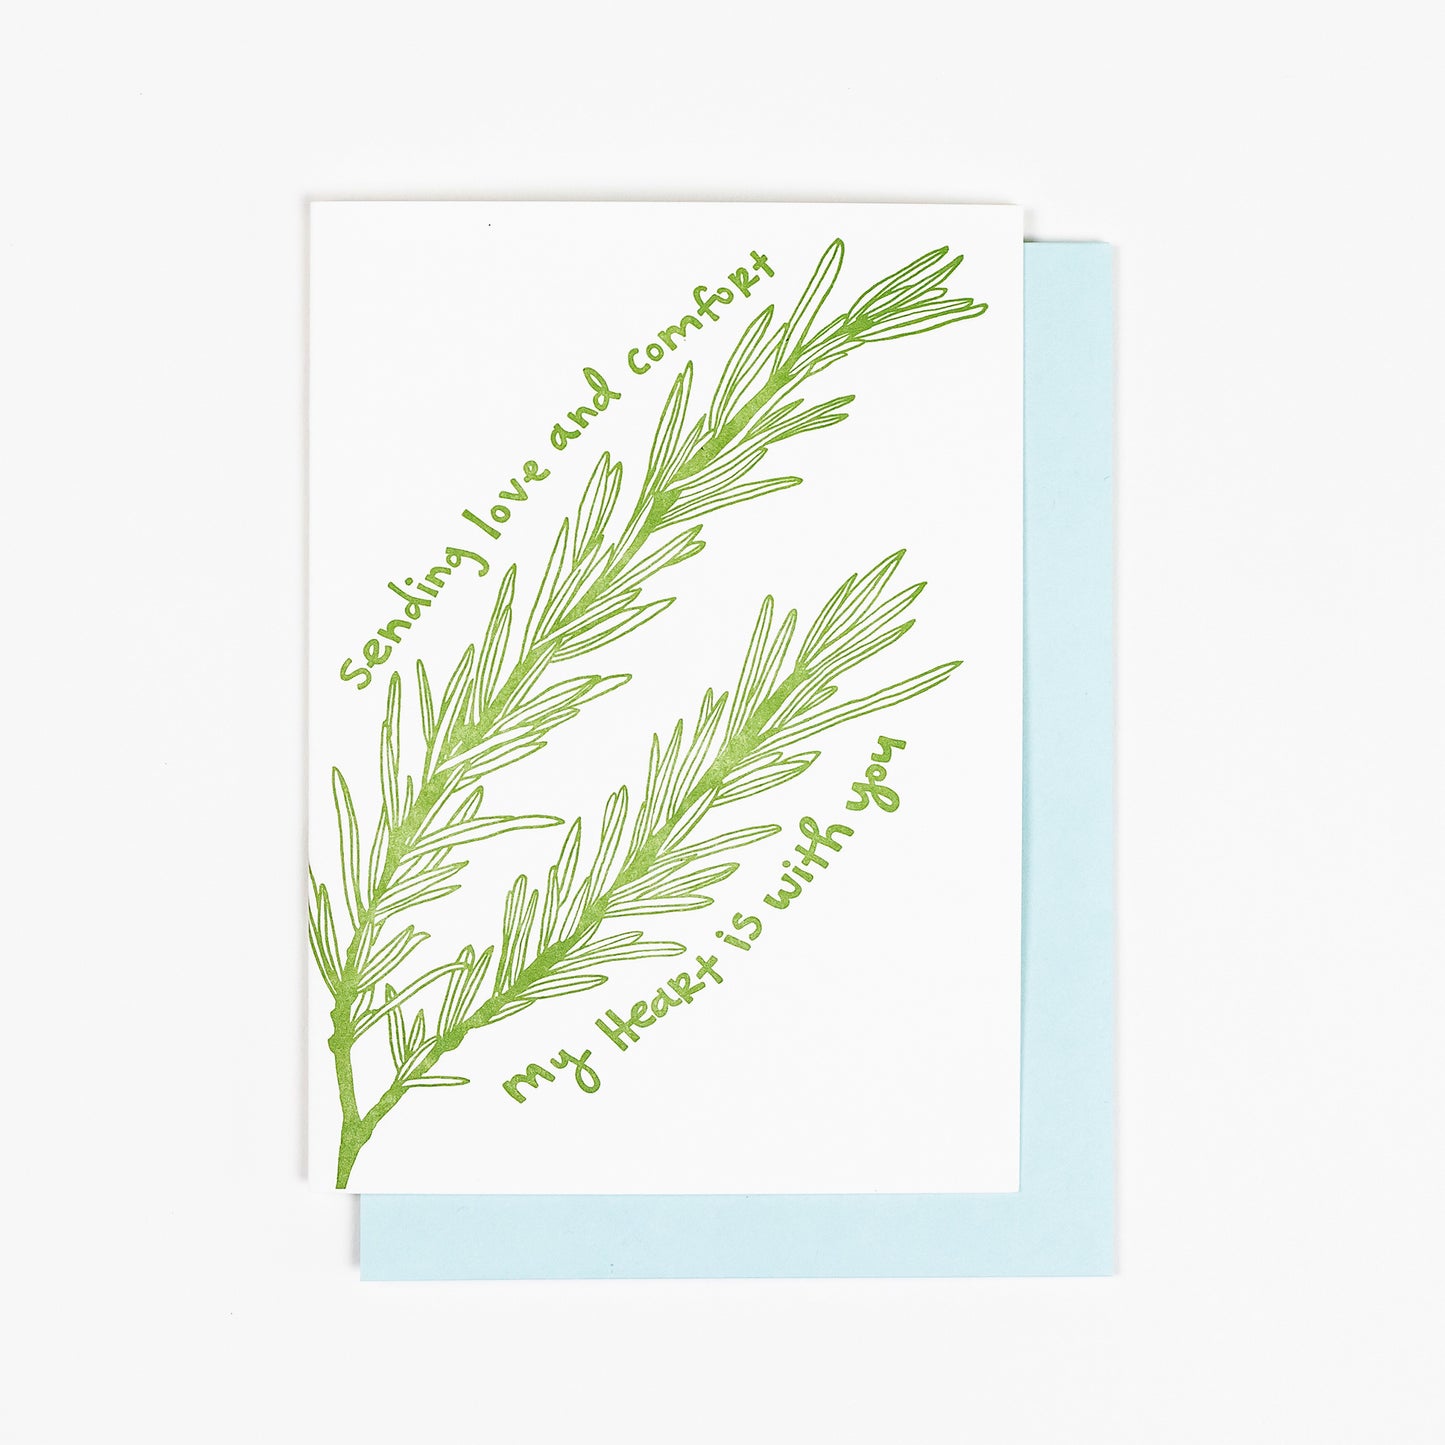 Letterpress greeting card featuring an intricate hand-drawn rosemary herb sprig, printed in a rich sage green ink. Whimsical hand-drawn text saying "Sending love and comfort. My heart is with you." is printed in the same green ink. The card is white, blank inside, and is paired with a light blue envelope.